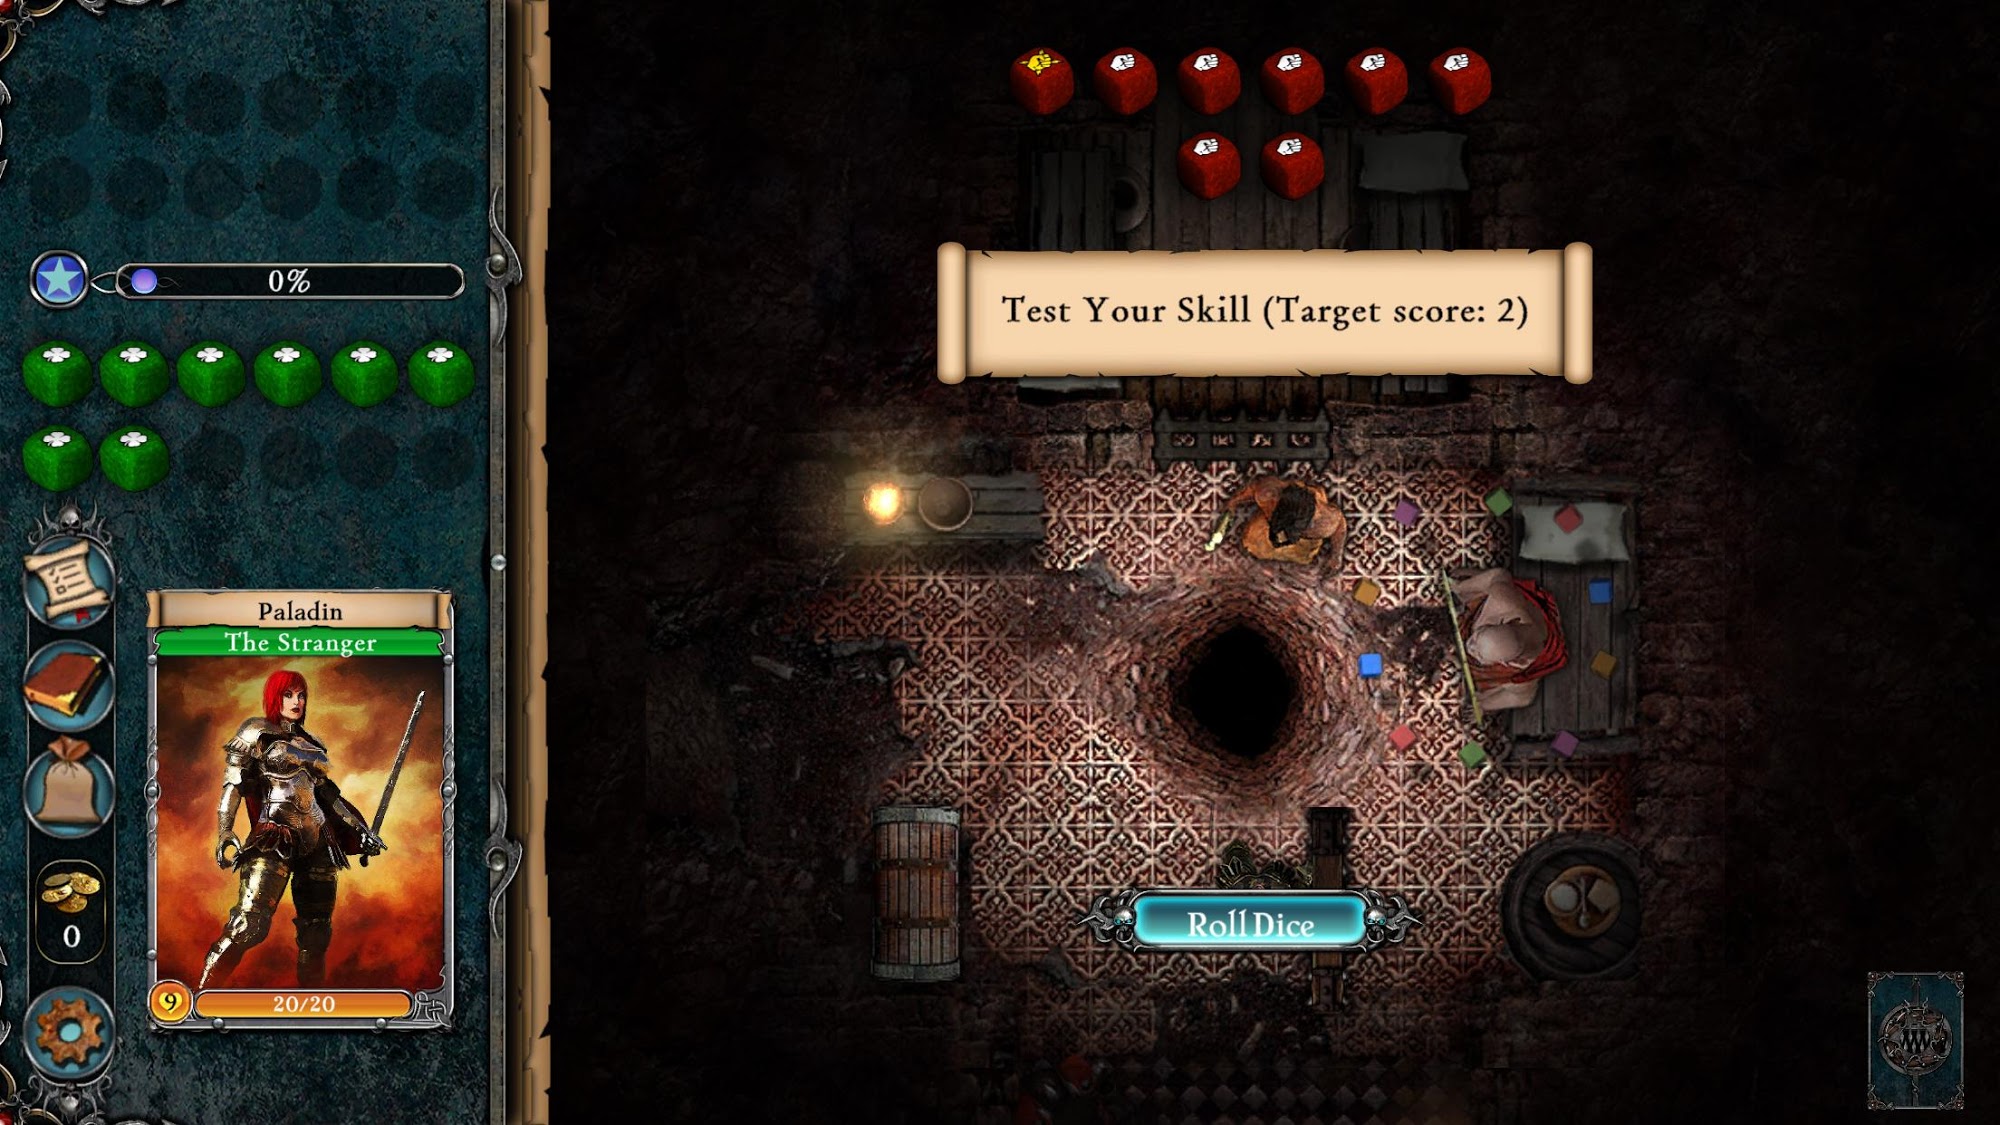 Deathtrap Dungeon Trilogy for Android